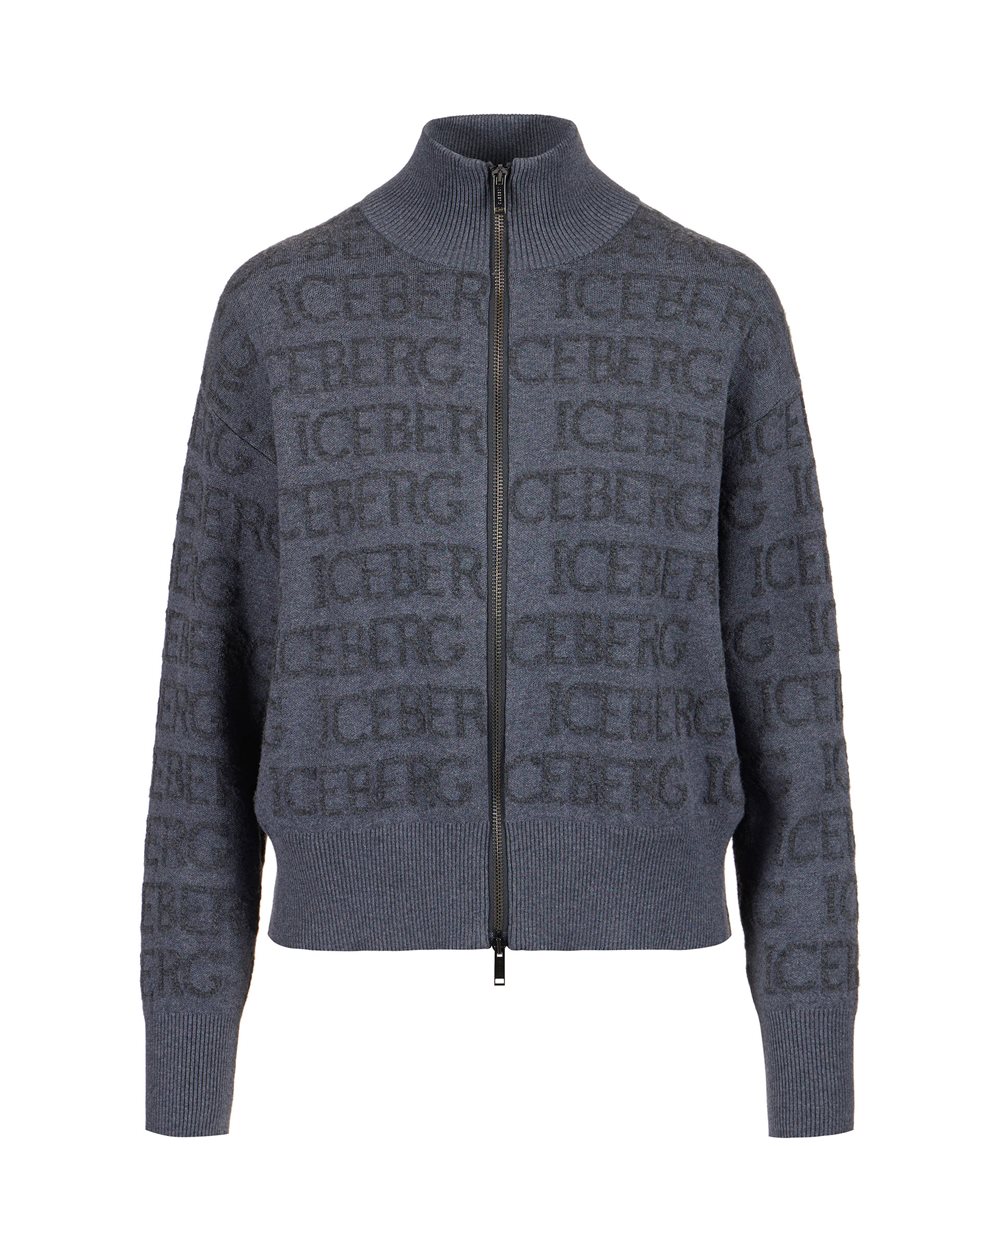 Wool blend jacket with Iceberg logo - carosello HP woman shoes | Iceberg - Official Website